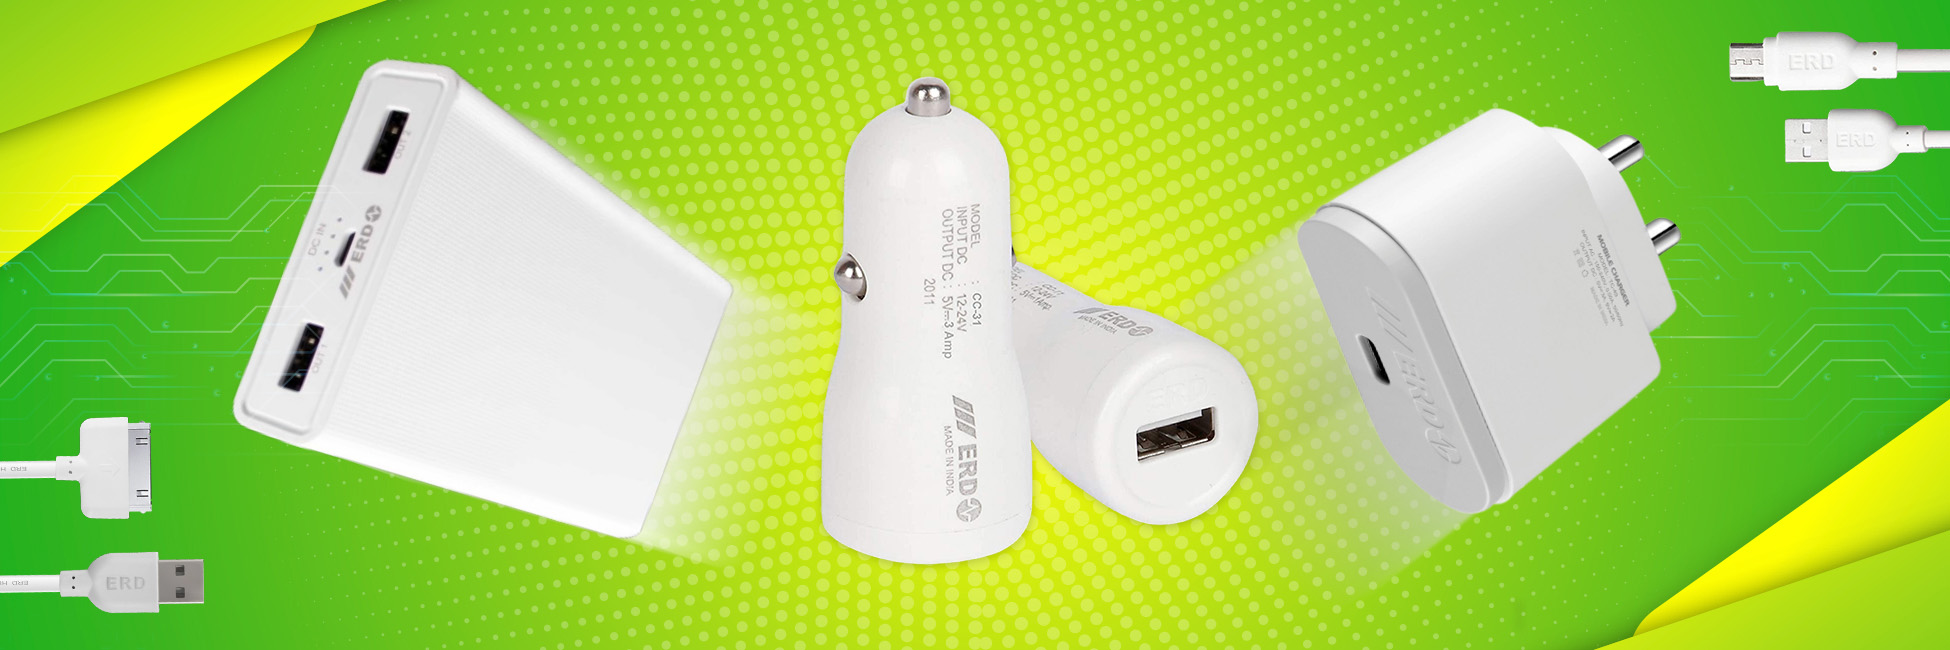 ERD Powerbanks Wall Chargers Car Chargers